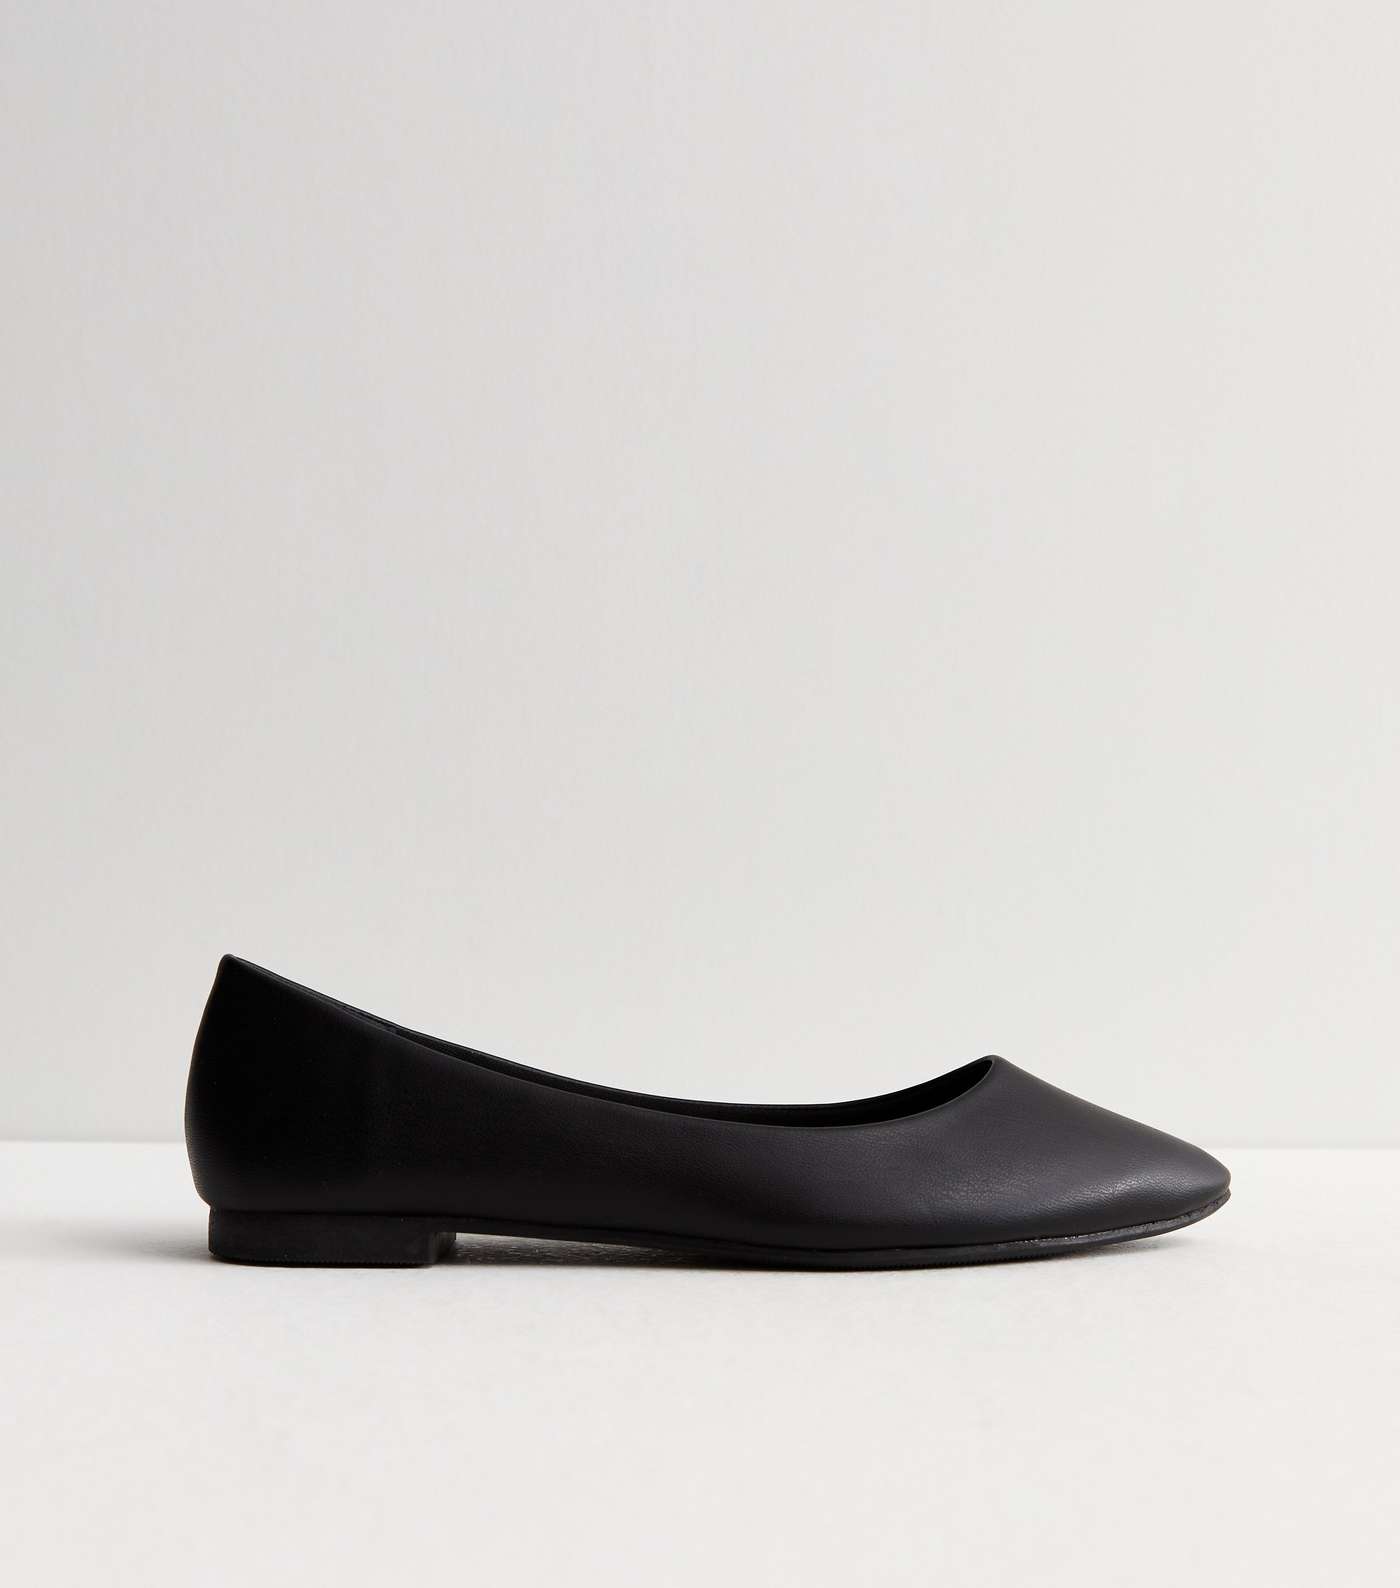 Black Leather-Look Pointed Ballerina Pumps Image 5